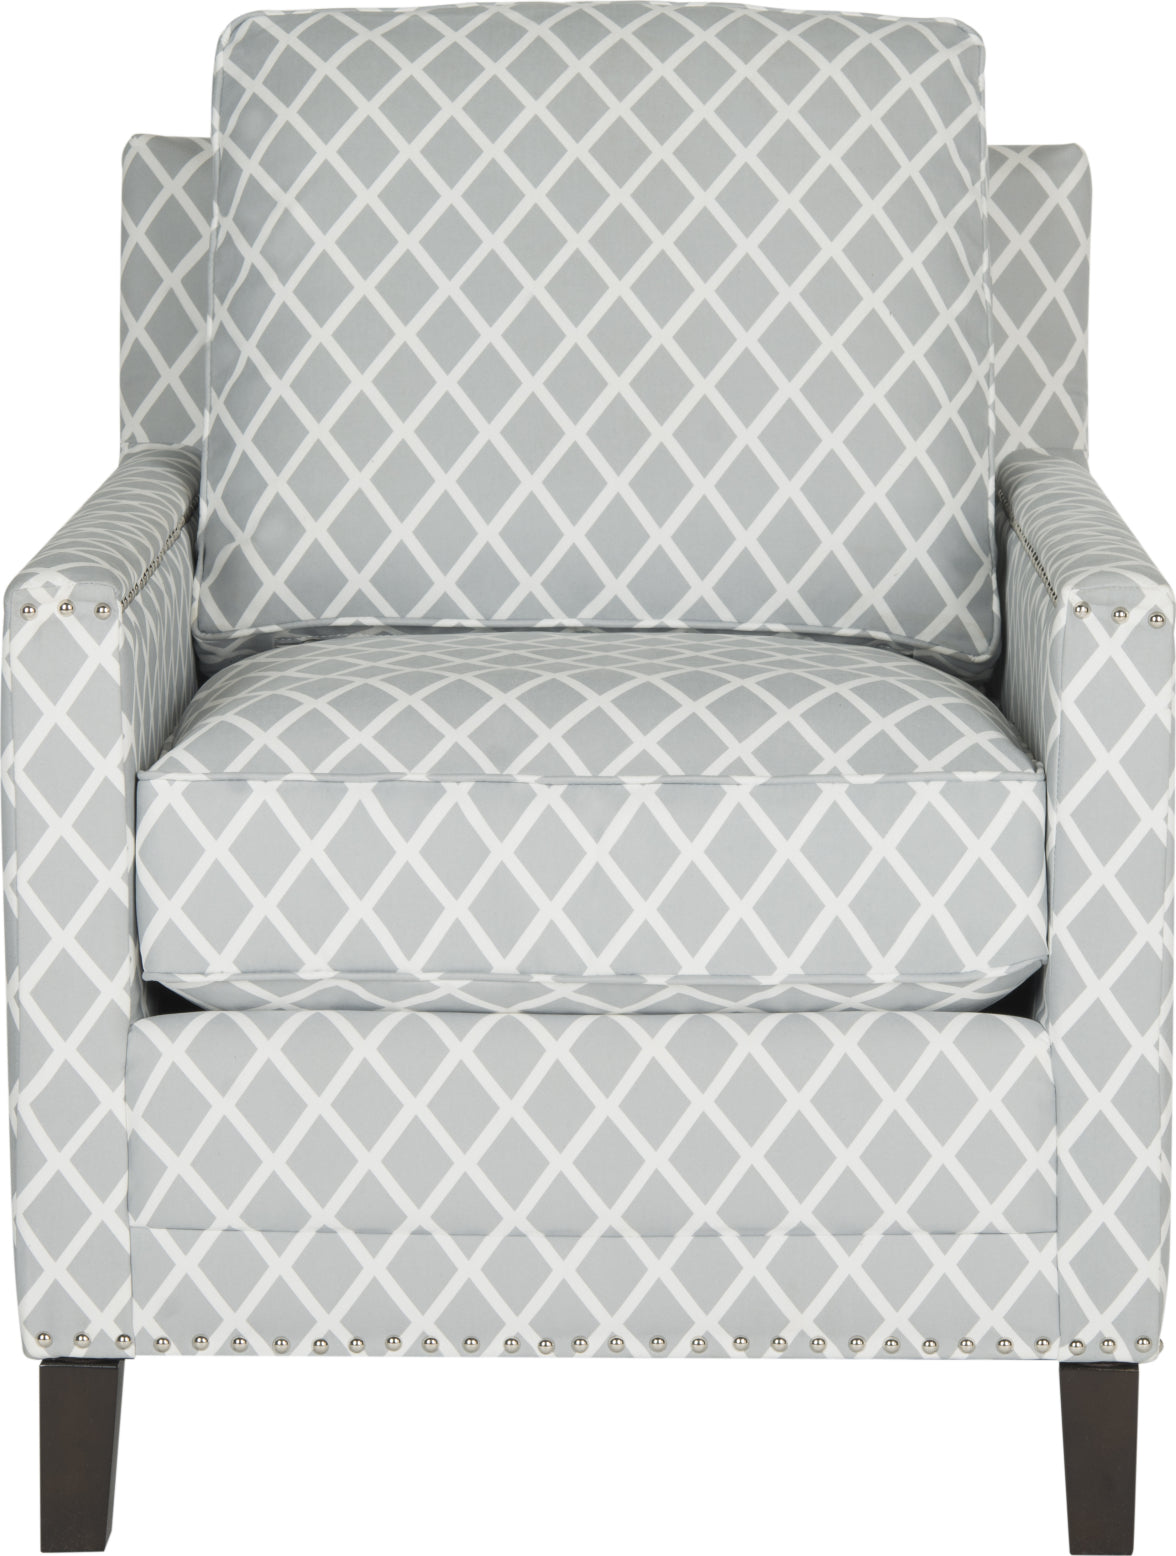 Safavieh Buckler Club Chair-Silver Nail Heads Grey and White Espresso Furniture main image